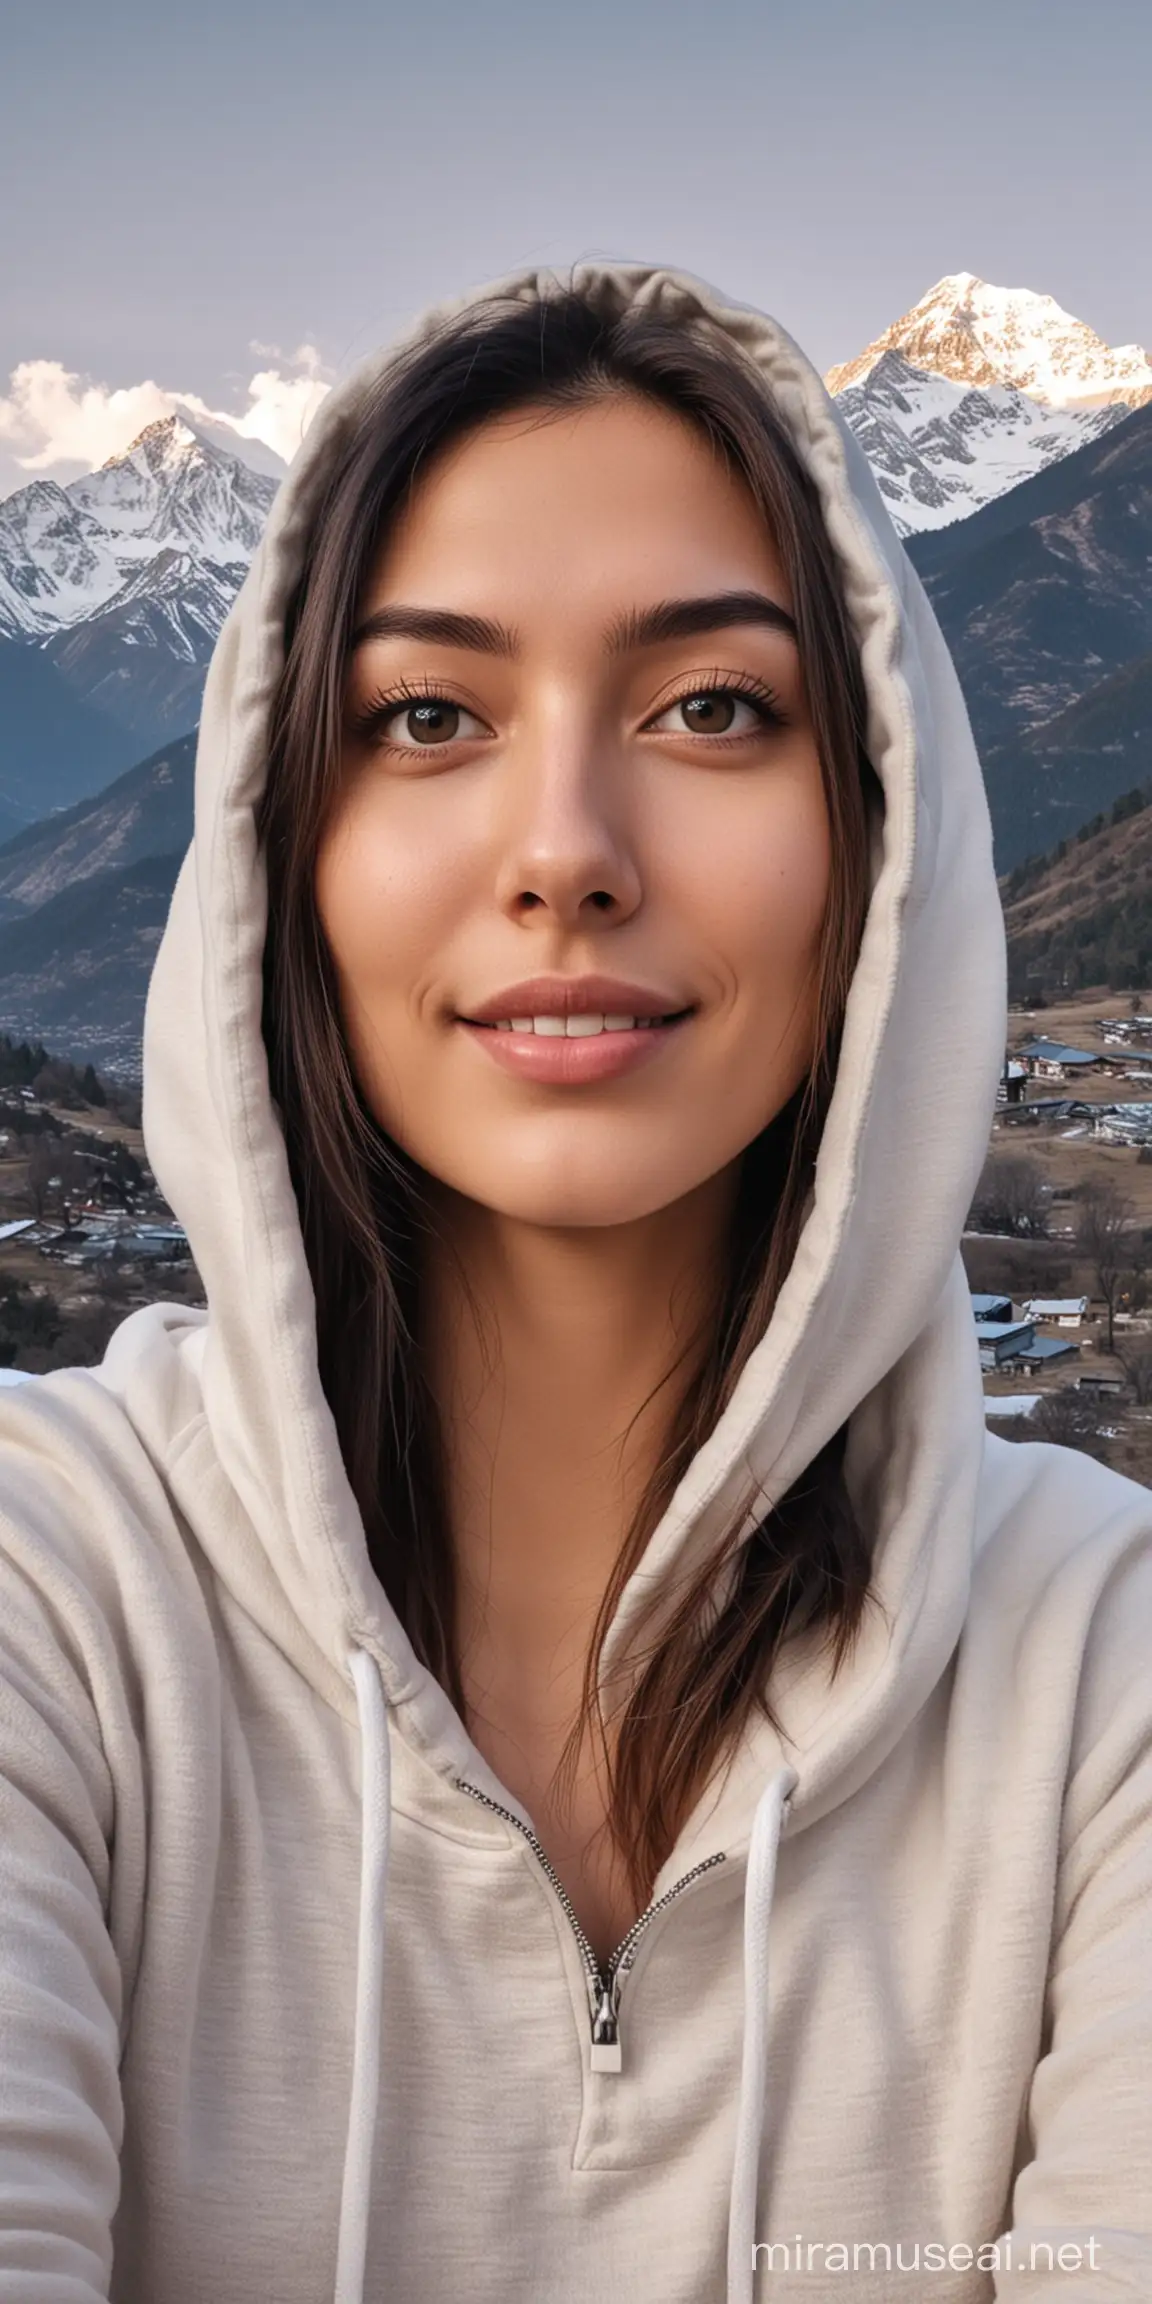 Girl in Hoodie Video Calling with Himalayas Background